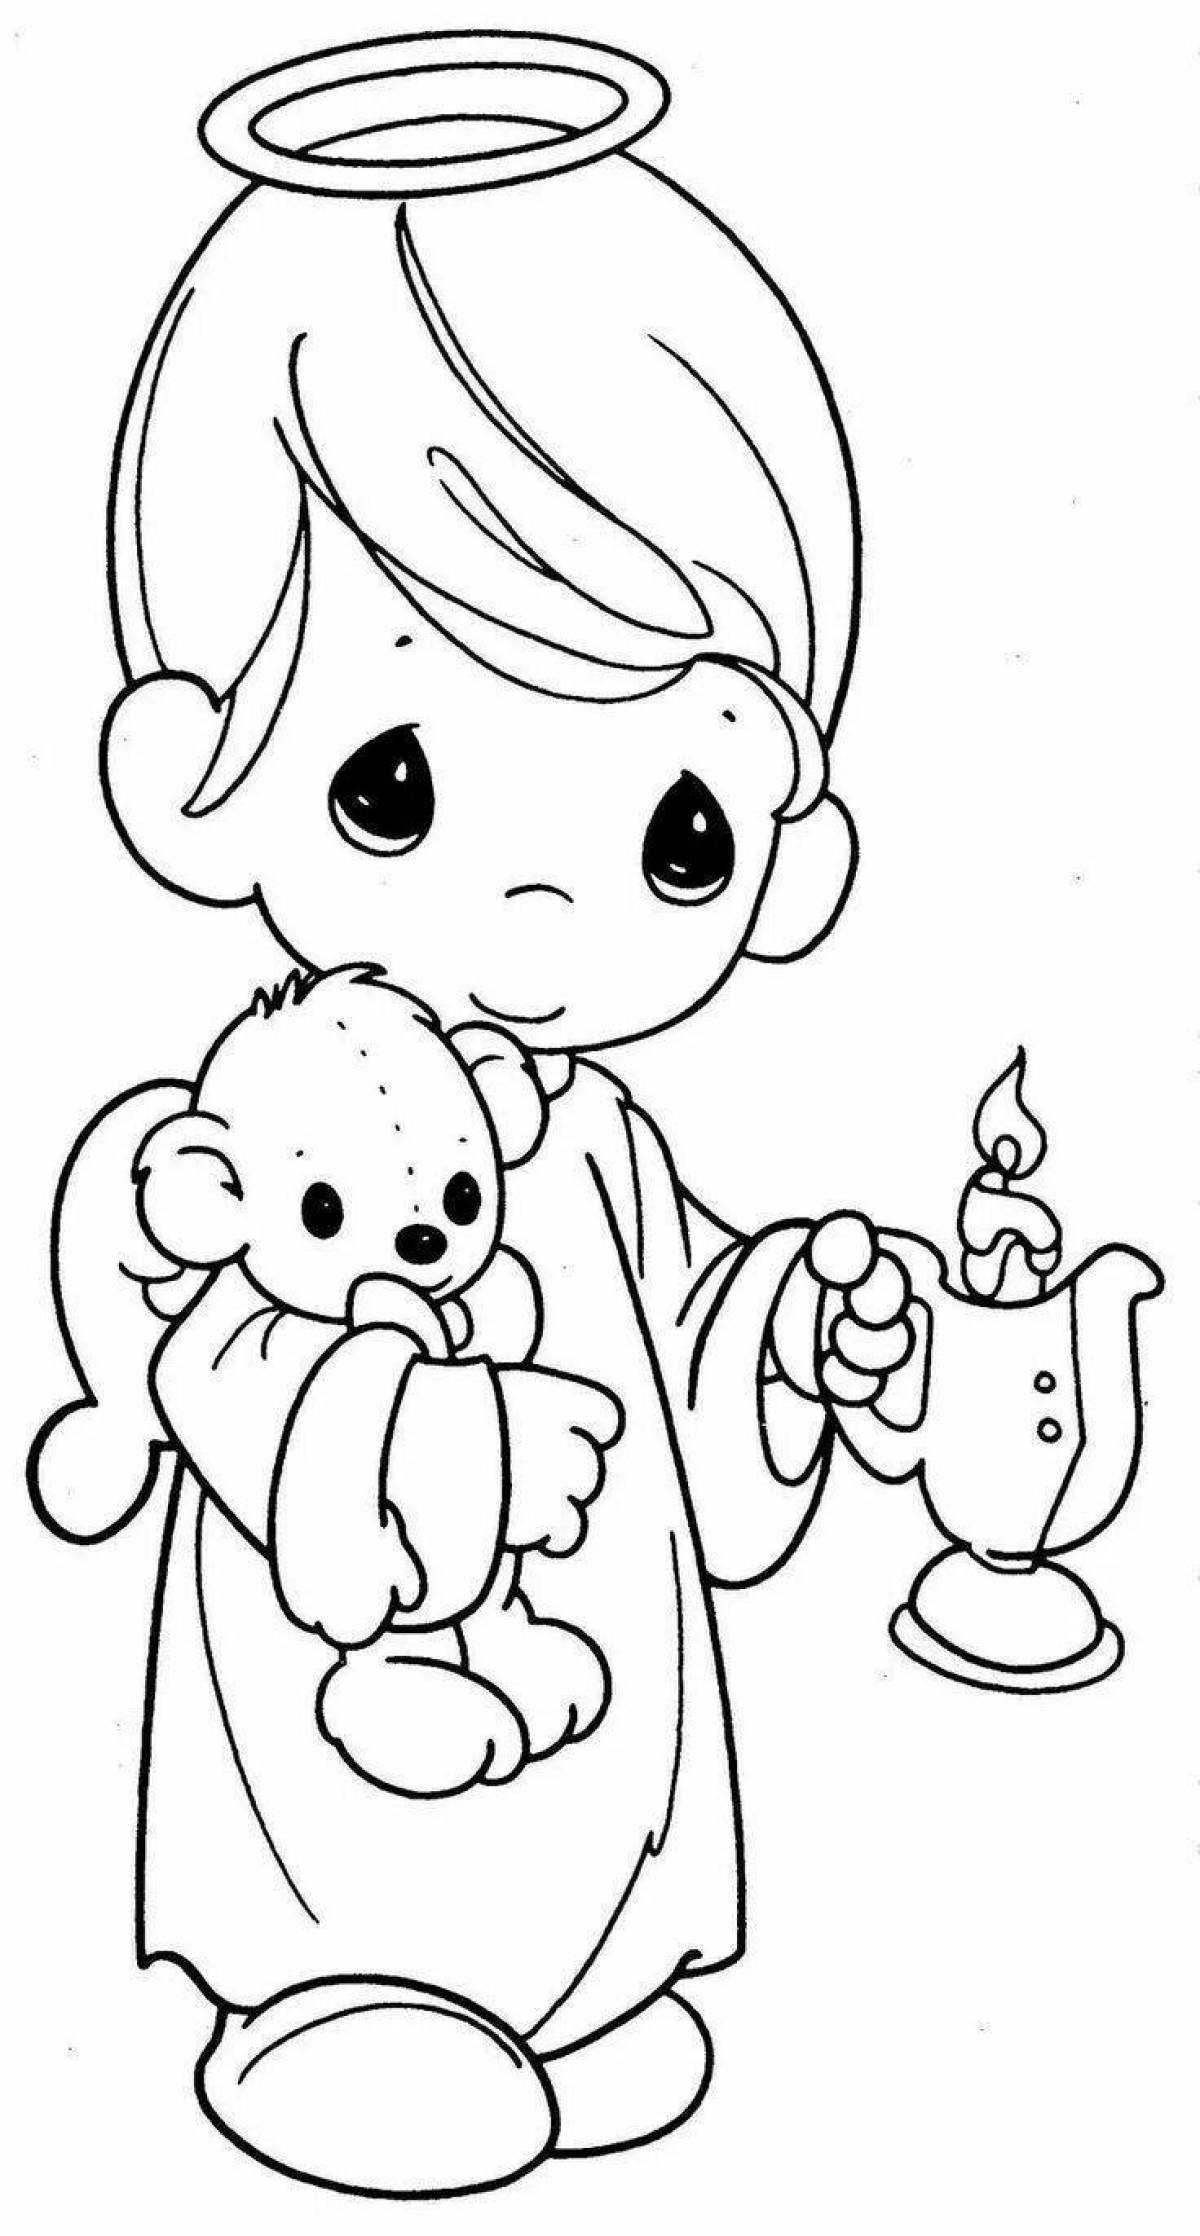 Pinterest coloring book for kids